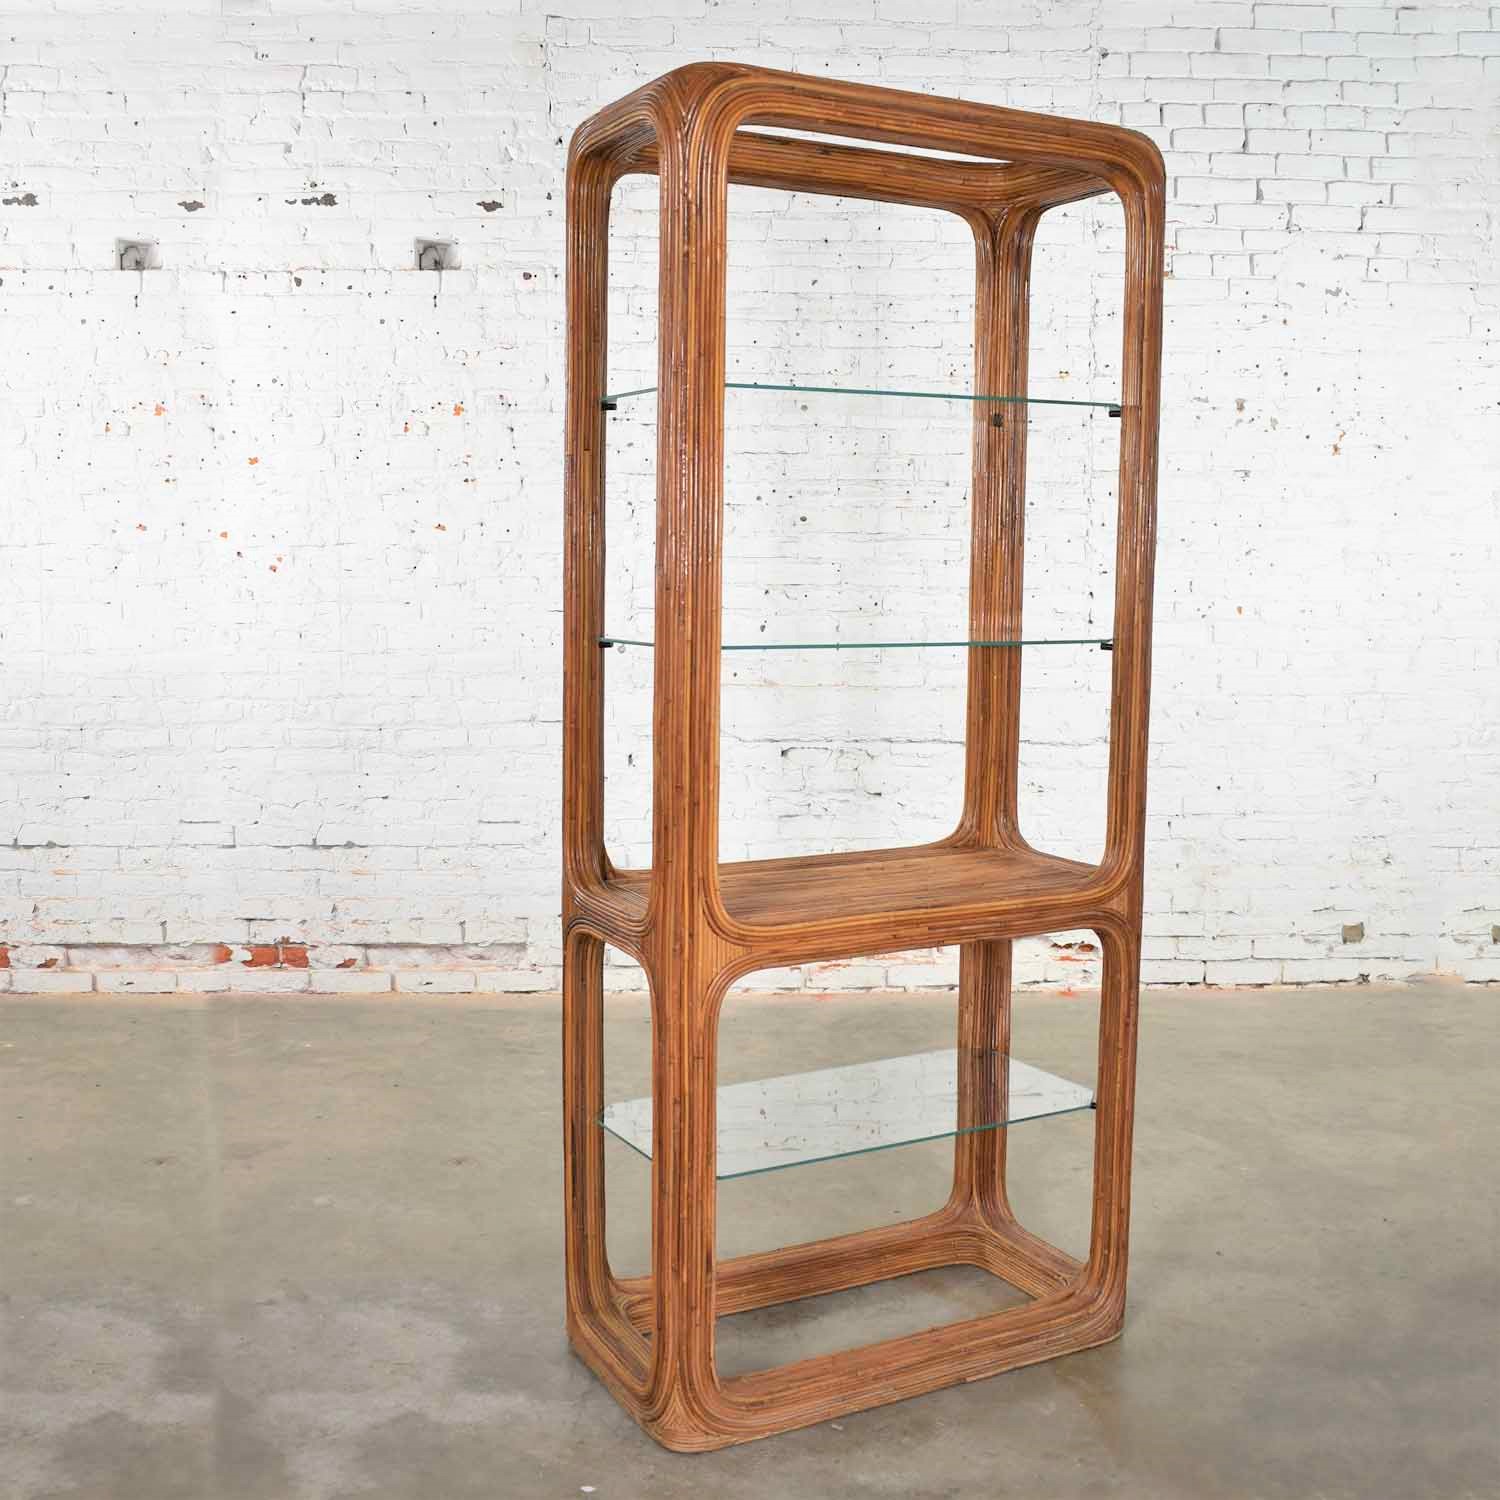 Organic Modern Pencil Reed Rattan Etagere With Glass Shelves Style